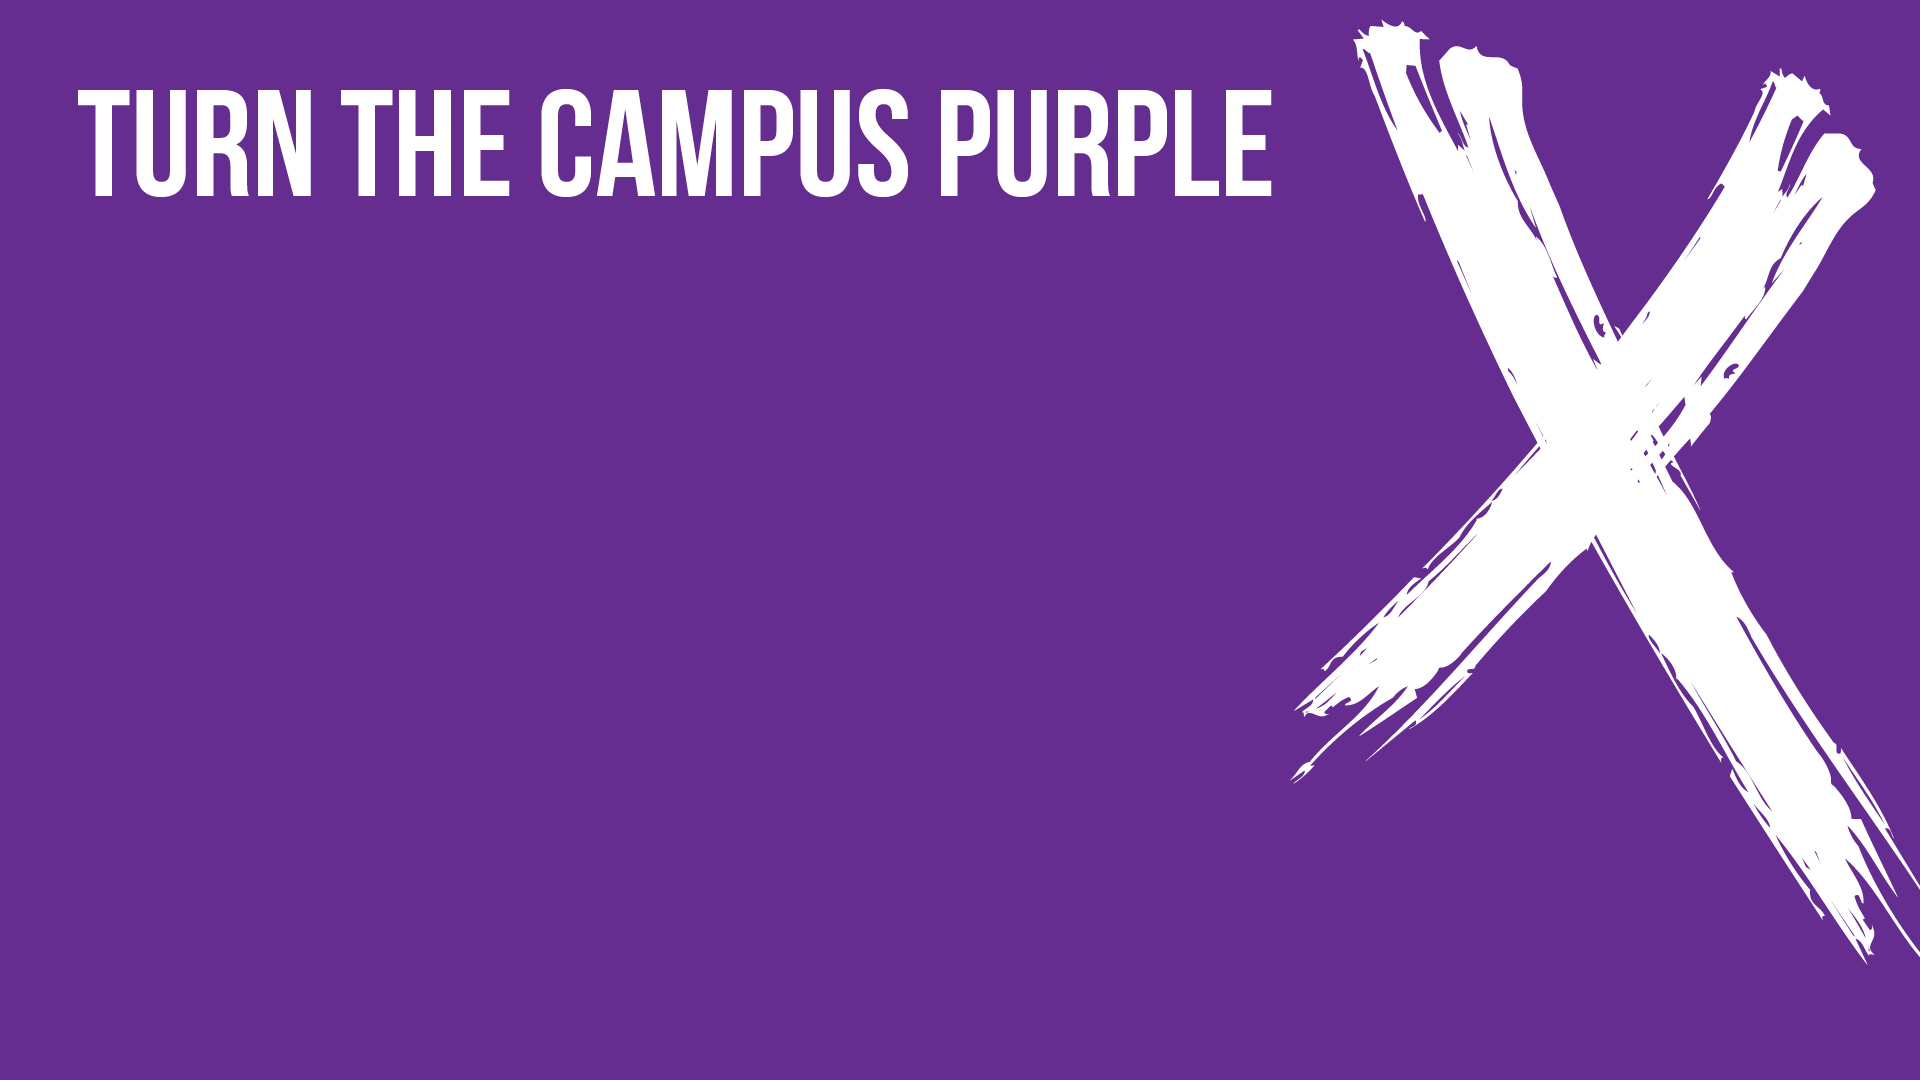 Turn the Campus Purple Zoom Background image with End Sexual Violence X graphic